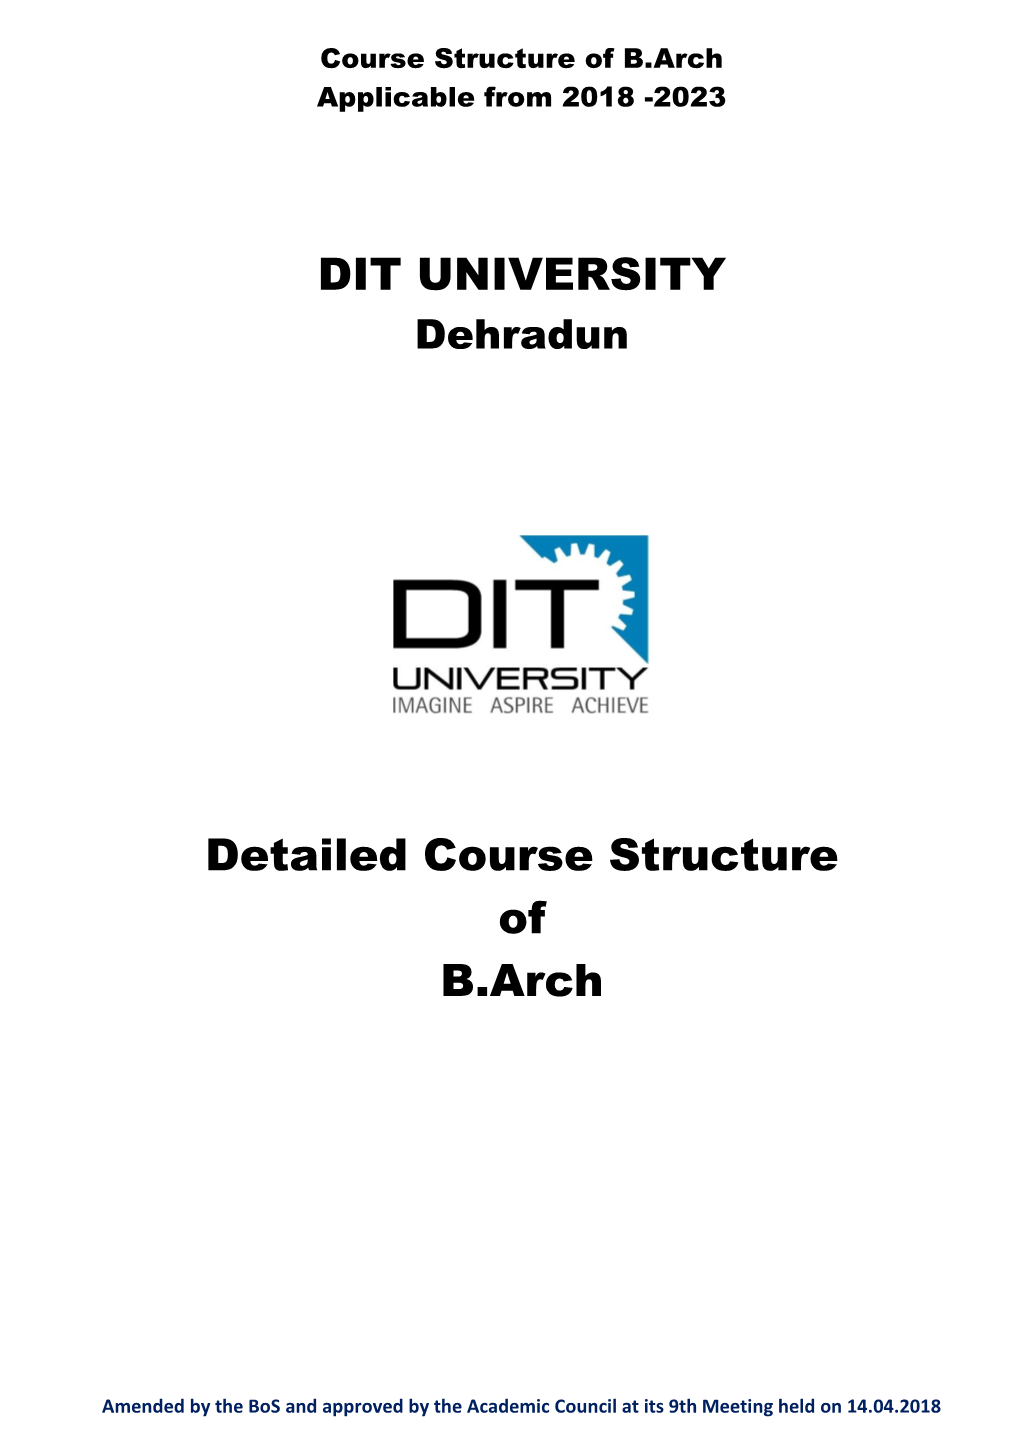 DIT UNIVERSITY Detailed Course Structure of B.Arch